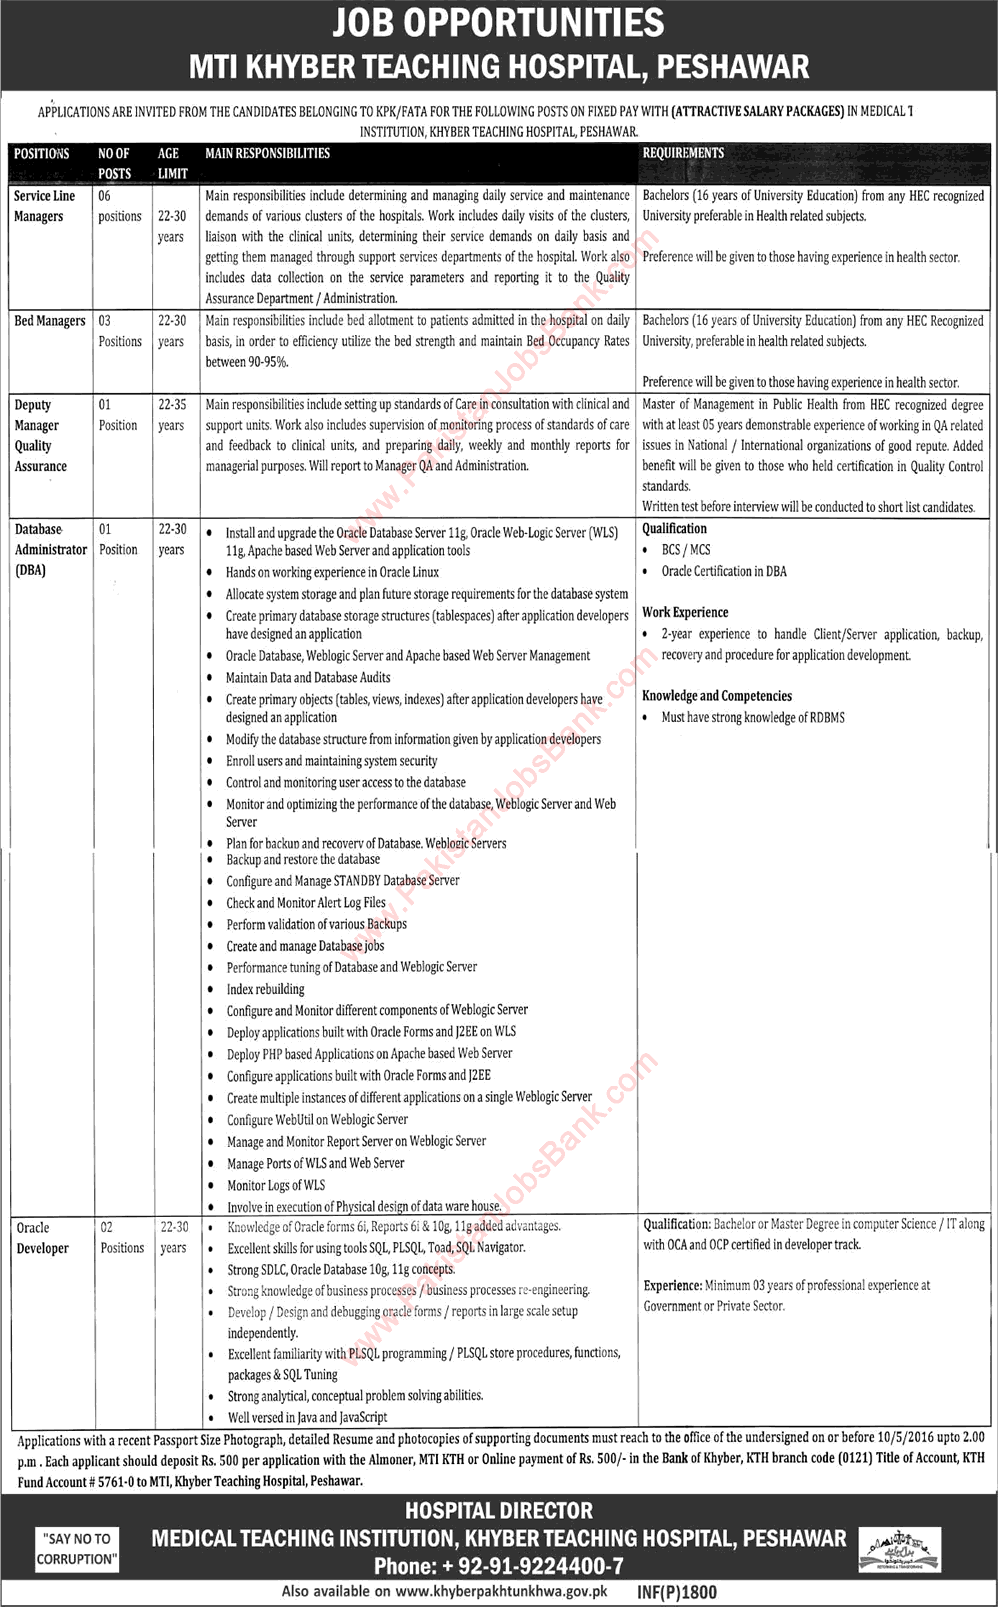 Khyber Teaching Hospital Peshawar Jobs April 2016 MTI KTH Service Line Managers & Others Latest